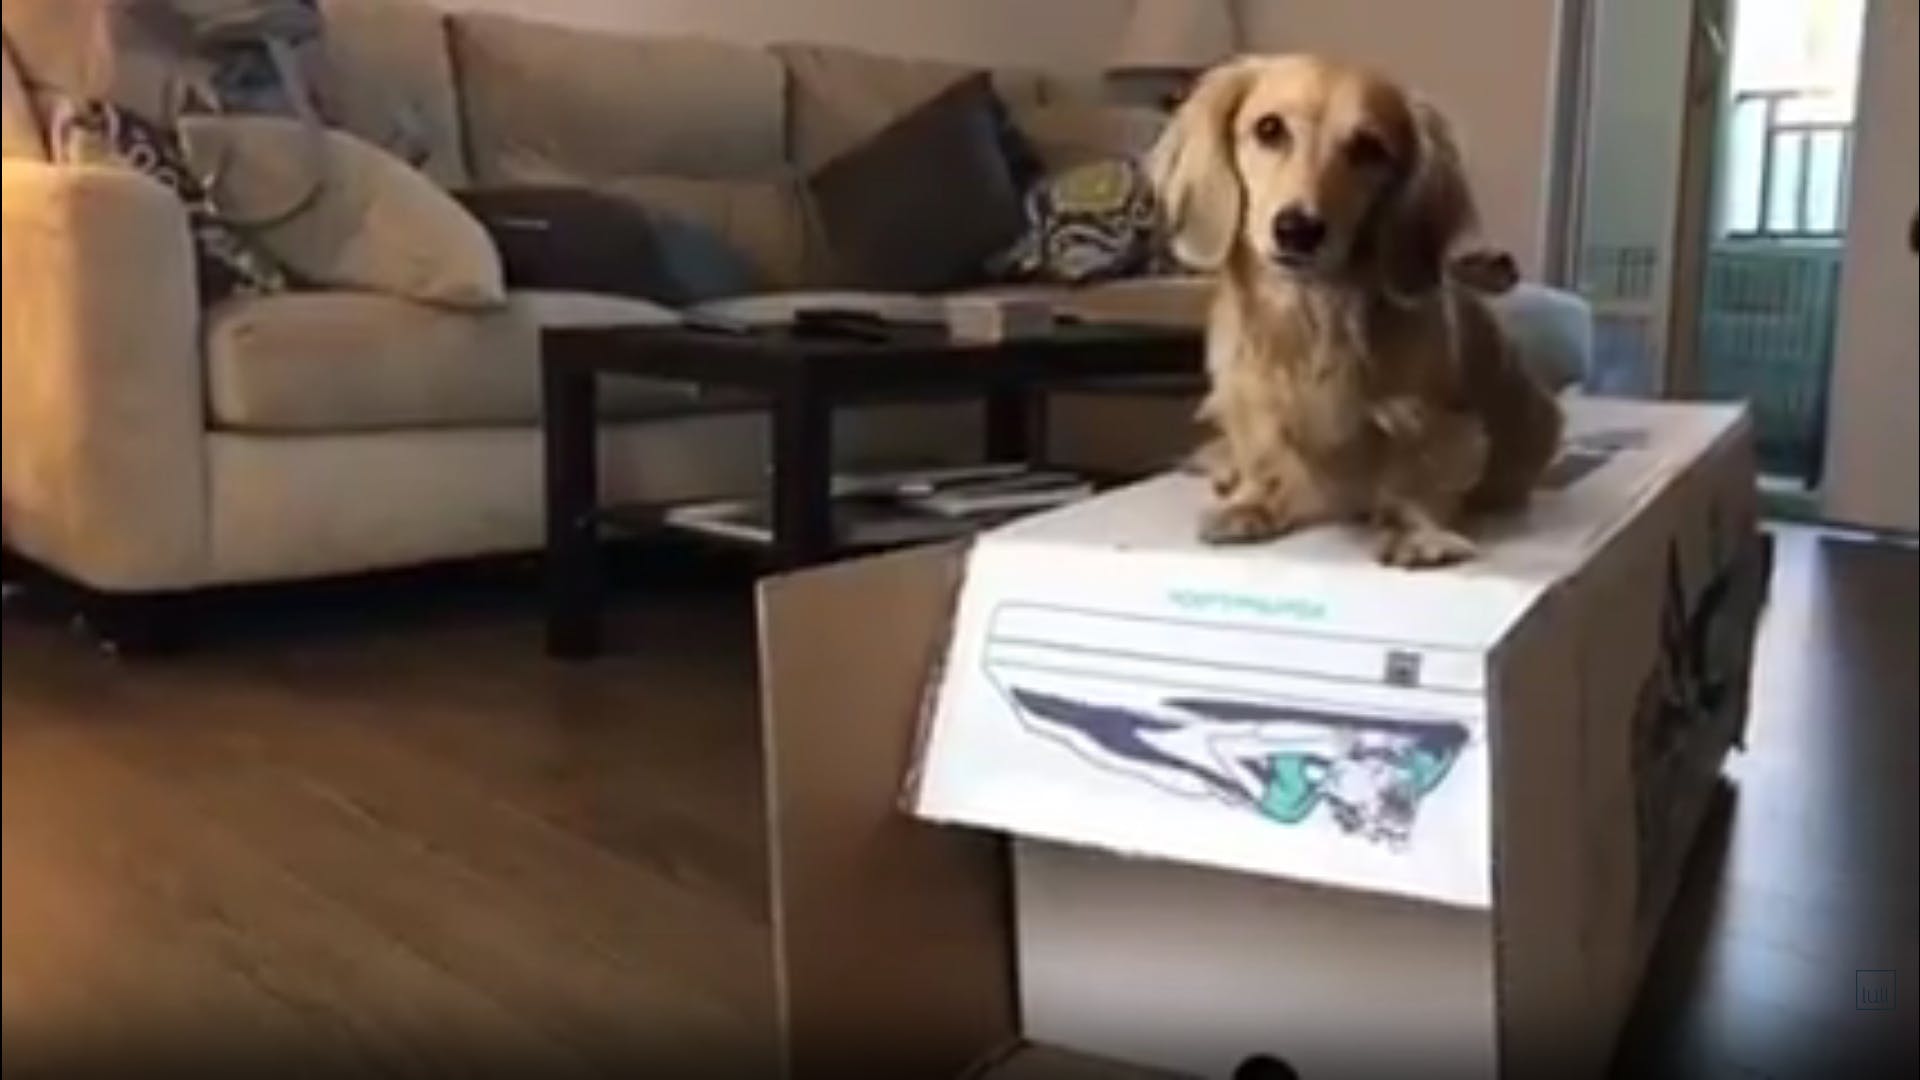 A dog sitting on top of a lull mattress box that has been opened.